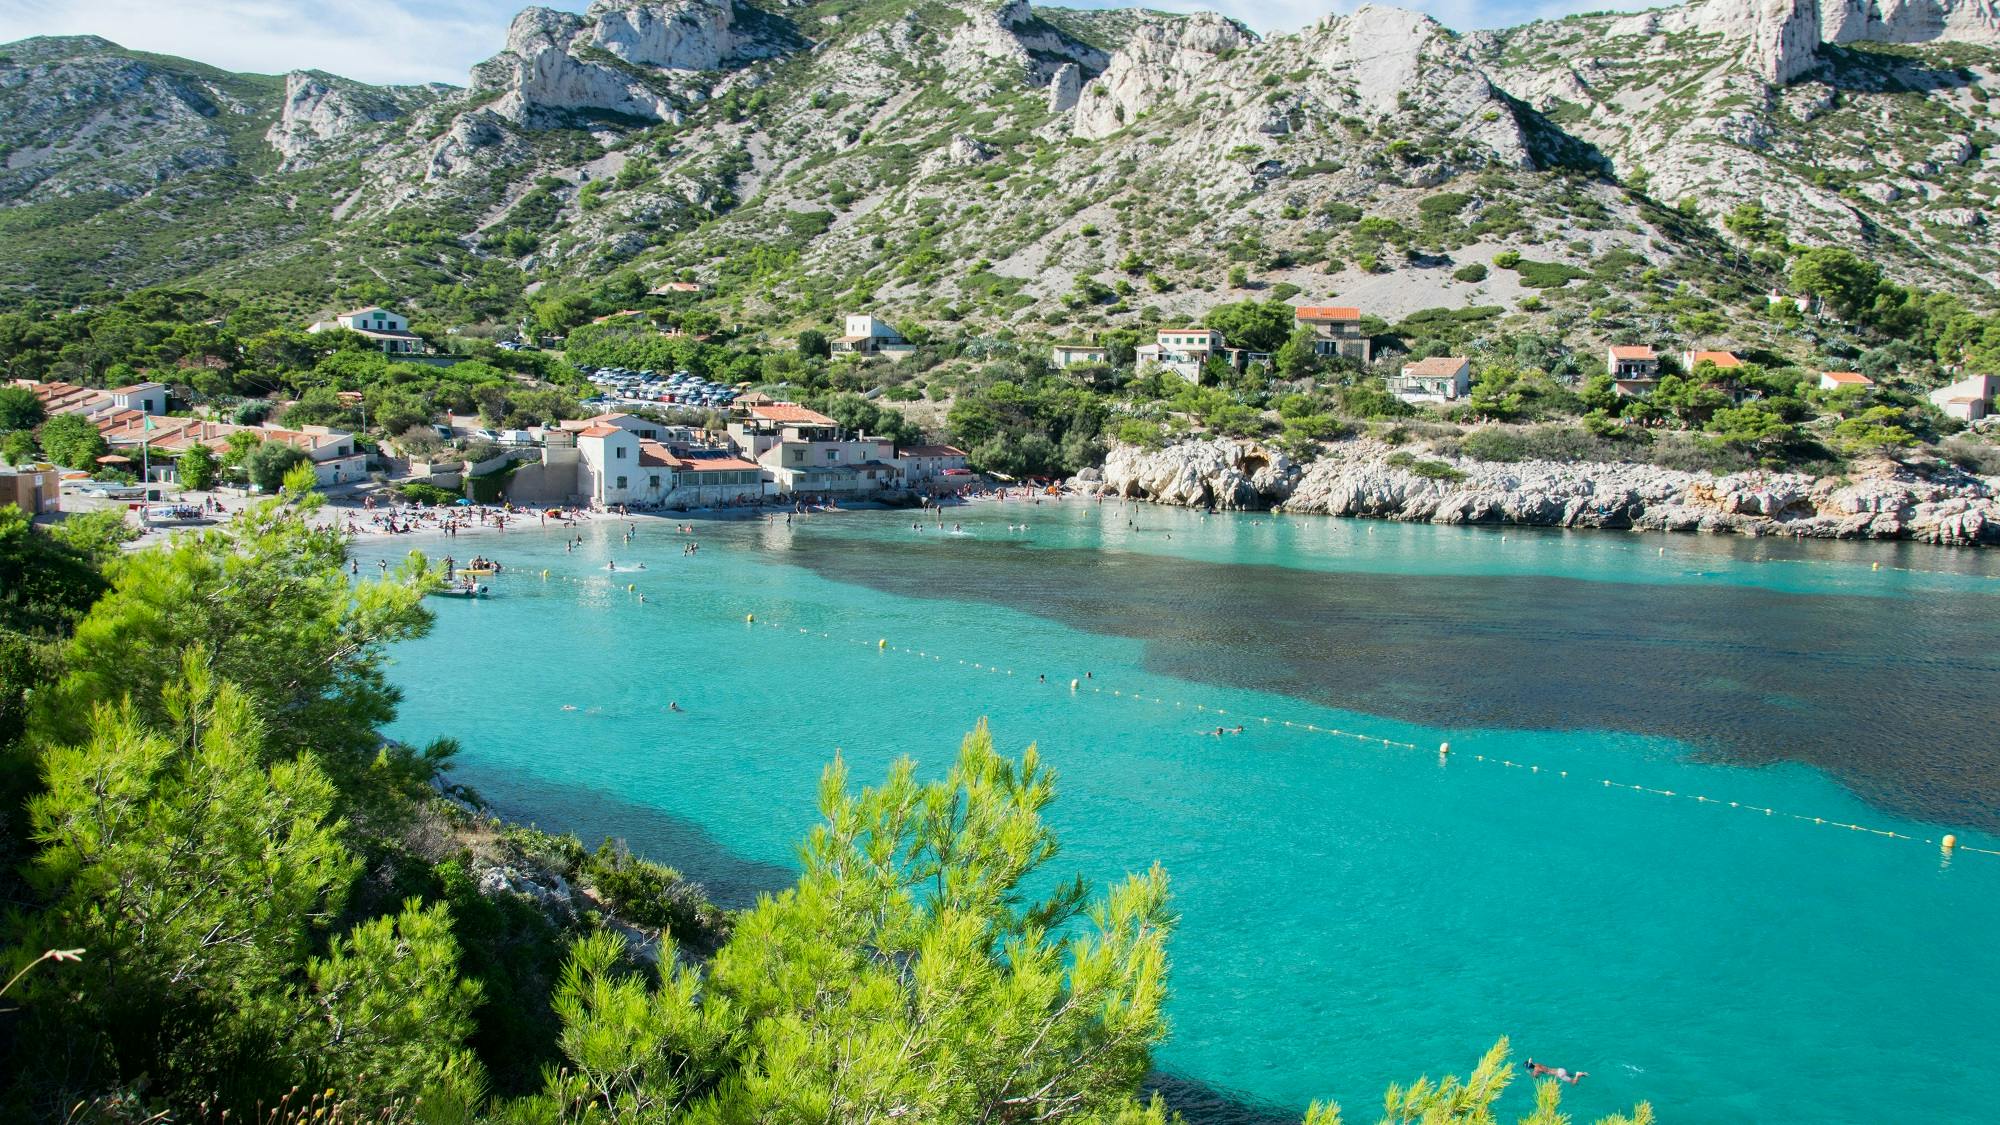 Full day e-bike tour in Calanques and Marseille city